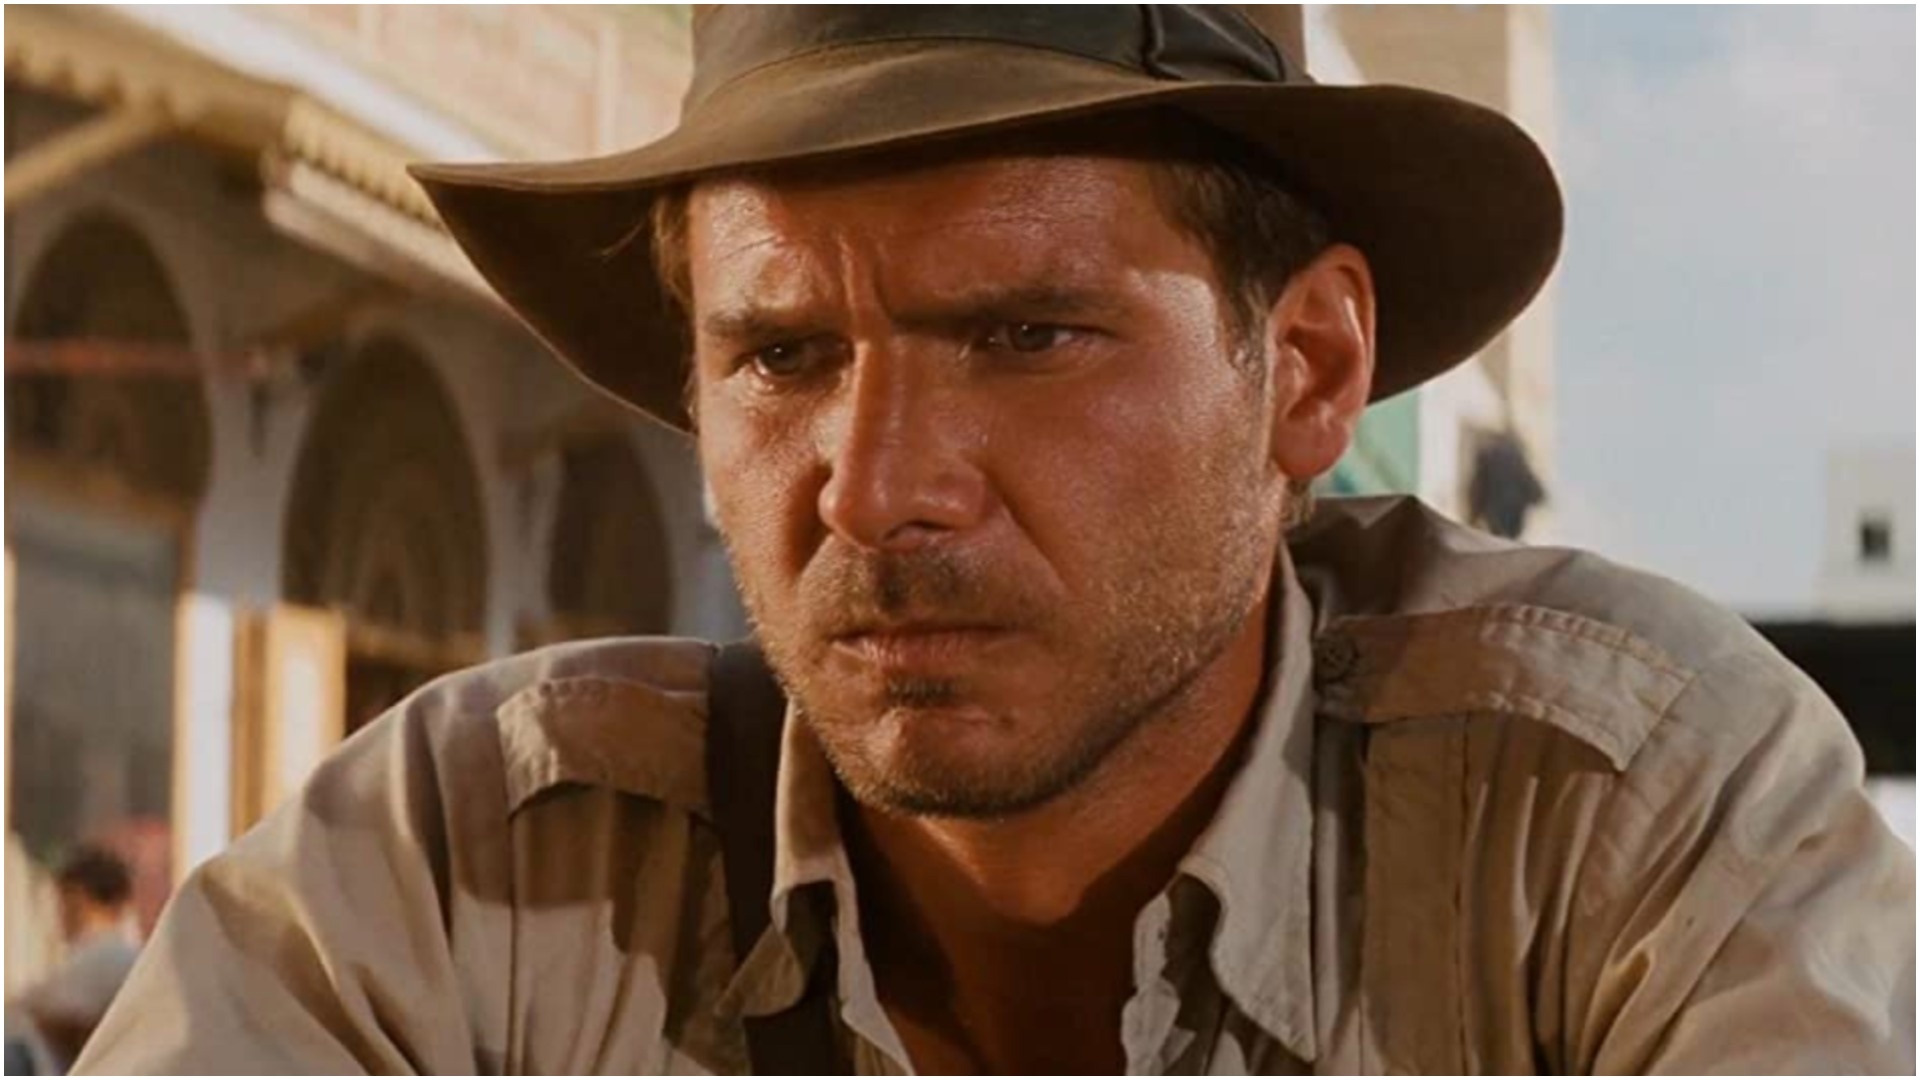 Harrison Ford (Indiana Jones): The classic hero, The quick-witted and hardy archaeologist. 1920x1080 Full HD Wallpaper.